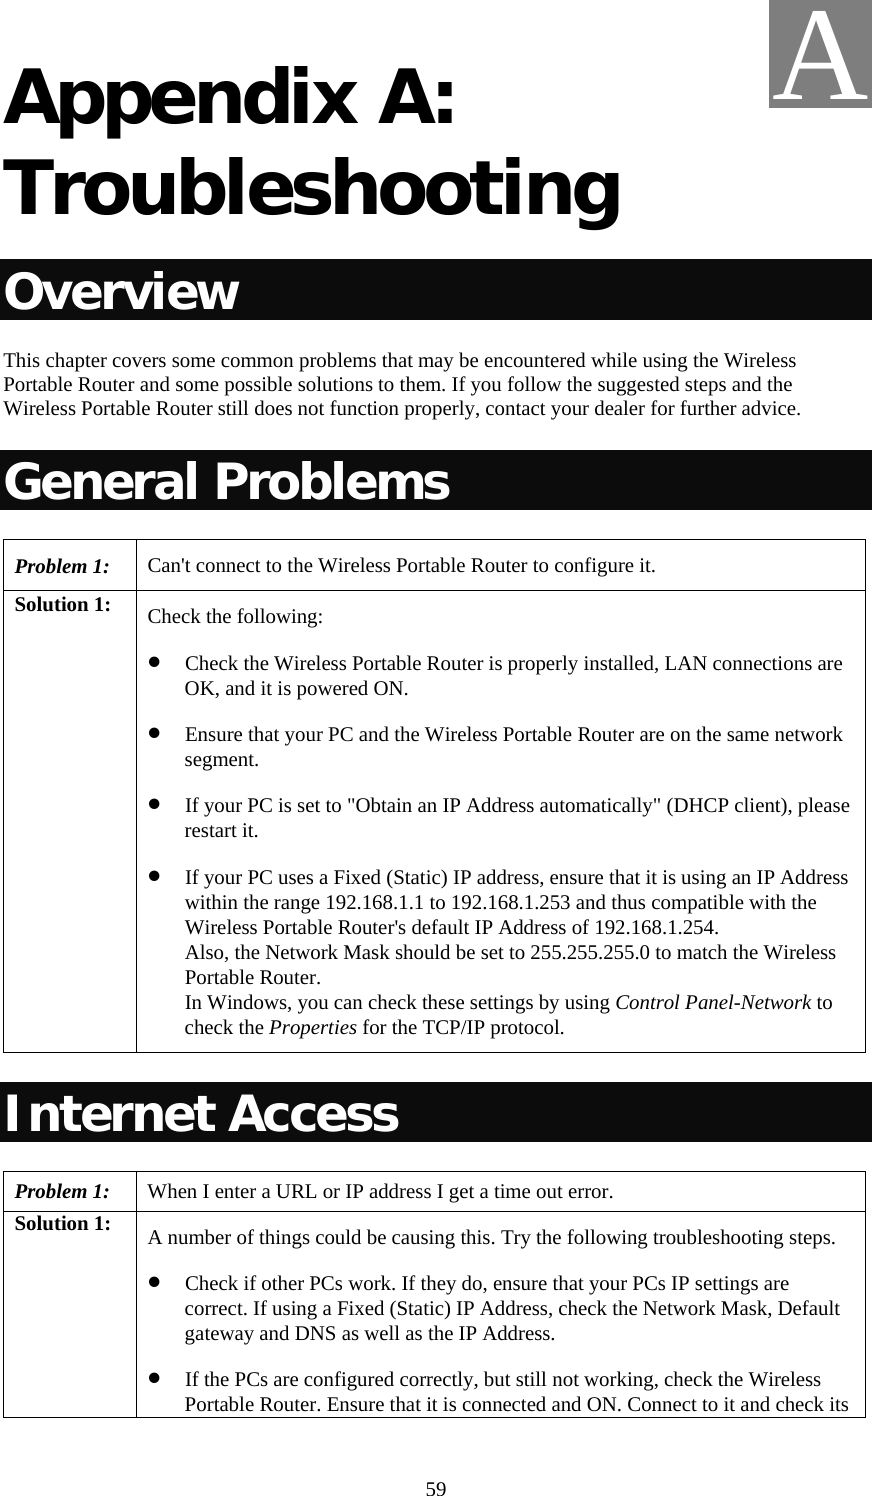   59 Appendix A: Troubleshooting Overview This chapter covers some common problems that may be encountered while using the Wireless Portable Router and some possible solutions to them. If you follow the suggested steps and the Wireless Portable Router still does not function properly, contact your dealer for further advice. General Problems Problem 1:  Can&apos;t connect to the Wireless Portable Router to configure it. Solution 1:  Check the following: • Check the Wireless Portable Router is properly installed, LAN connections are OK, and it is powered ON. • Ensure that your PC and the Wireless Portable Router are on the same network segment.  • If your PC is set to &quot;Obtain an IP Address automatically&quot; (DHCP client), please restart it. • If your PC uses a Fixed (Static) IP address, ensure that it is using an IP Address within the range 192.168.1.1 to 192.168.1.253 and thus compatible with the Wireless Portable Router&apos;s default IP Address of 192.168.1.254.  Also, the Network Mask should be set to 255.255.255.0 to match the Wireless Portable Router. In Windows, you can check these settings by using Control Panel-Network to check the Properties for the TCP/IP protocol.  Internet Access Problem 1: When I enter a URL or IP address I get a time out error. Solution 1:  A number of things could be causing this. Try the following troubleshooting steps. • Check if other PCs work. If they do, ensure that your PCs IP settings are correct. If using a Fixed (Static) IP Address, check the Network Mask, Default gateway and DNS as well as the IP Address. • If the PCs are configured correctly, but still not working, check the Wireless Portable Router. Ensure that it is connected and ON. Connect to it and check its A